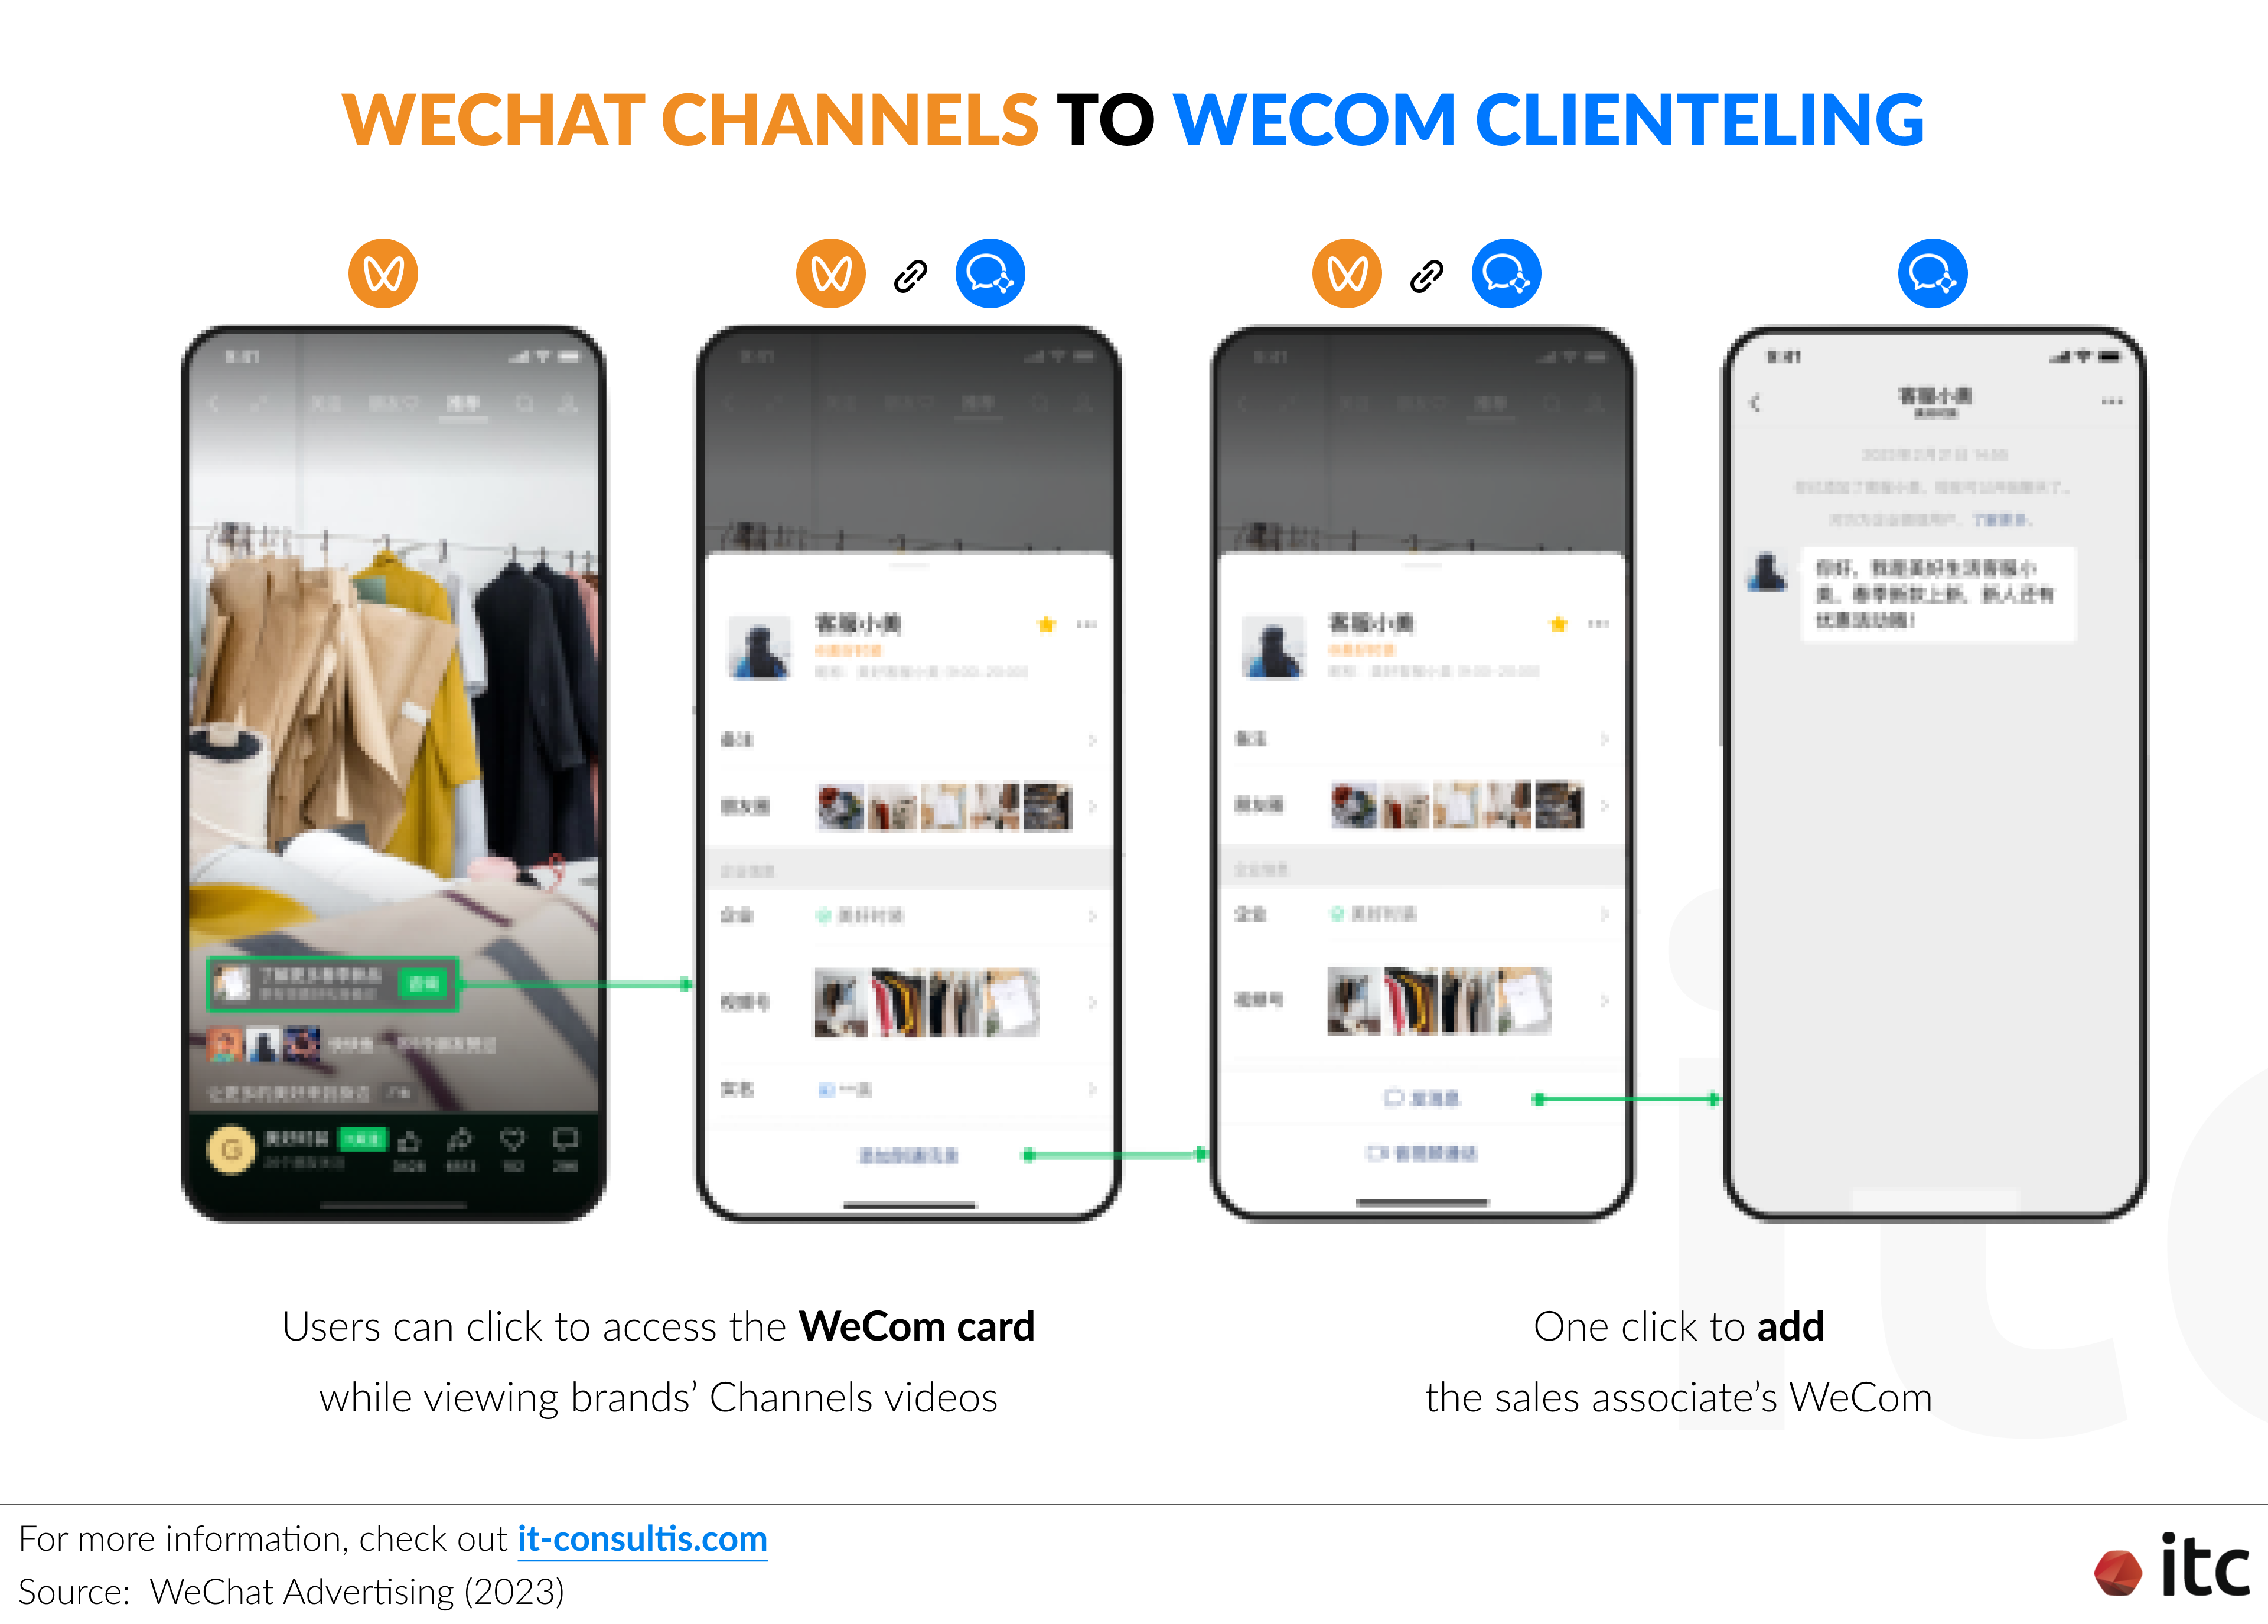 Users can click to access the WeCom card while viewing brands' Channels videos & they can add the sales associate's WeCom in 1 click